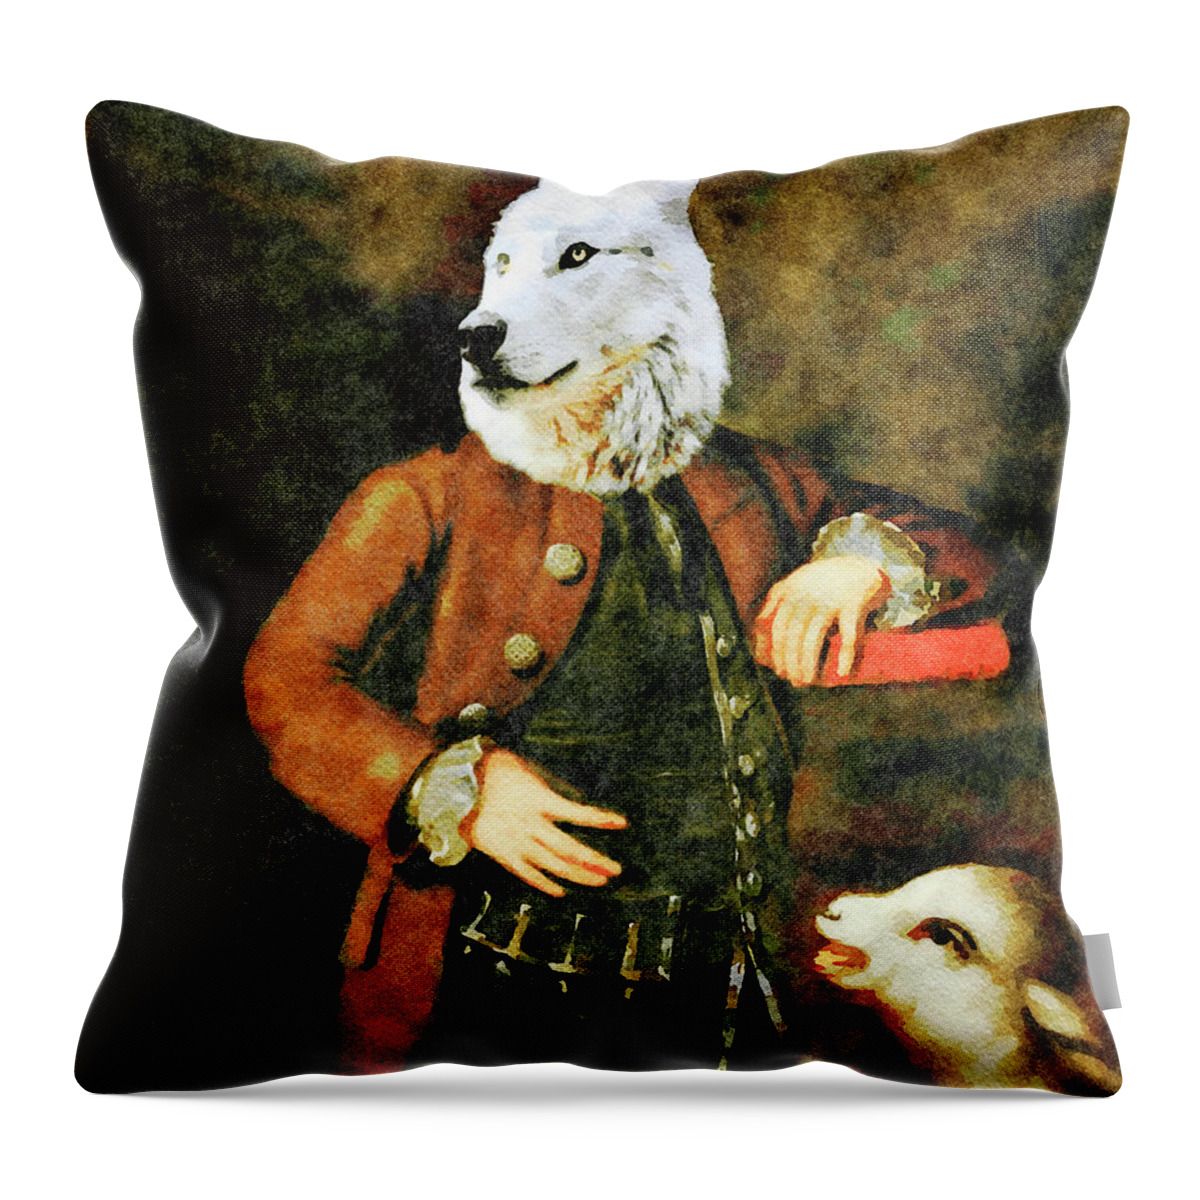 Watercolor Throw Pillow featuring the mixed media The Wolf and the Lamb by Shelli Fitzpatrick